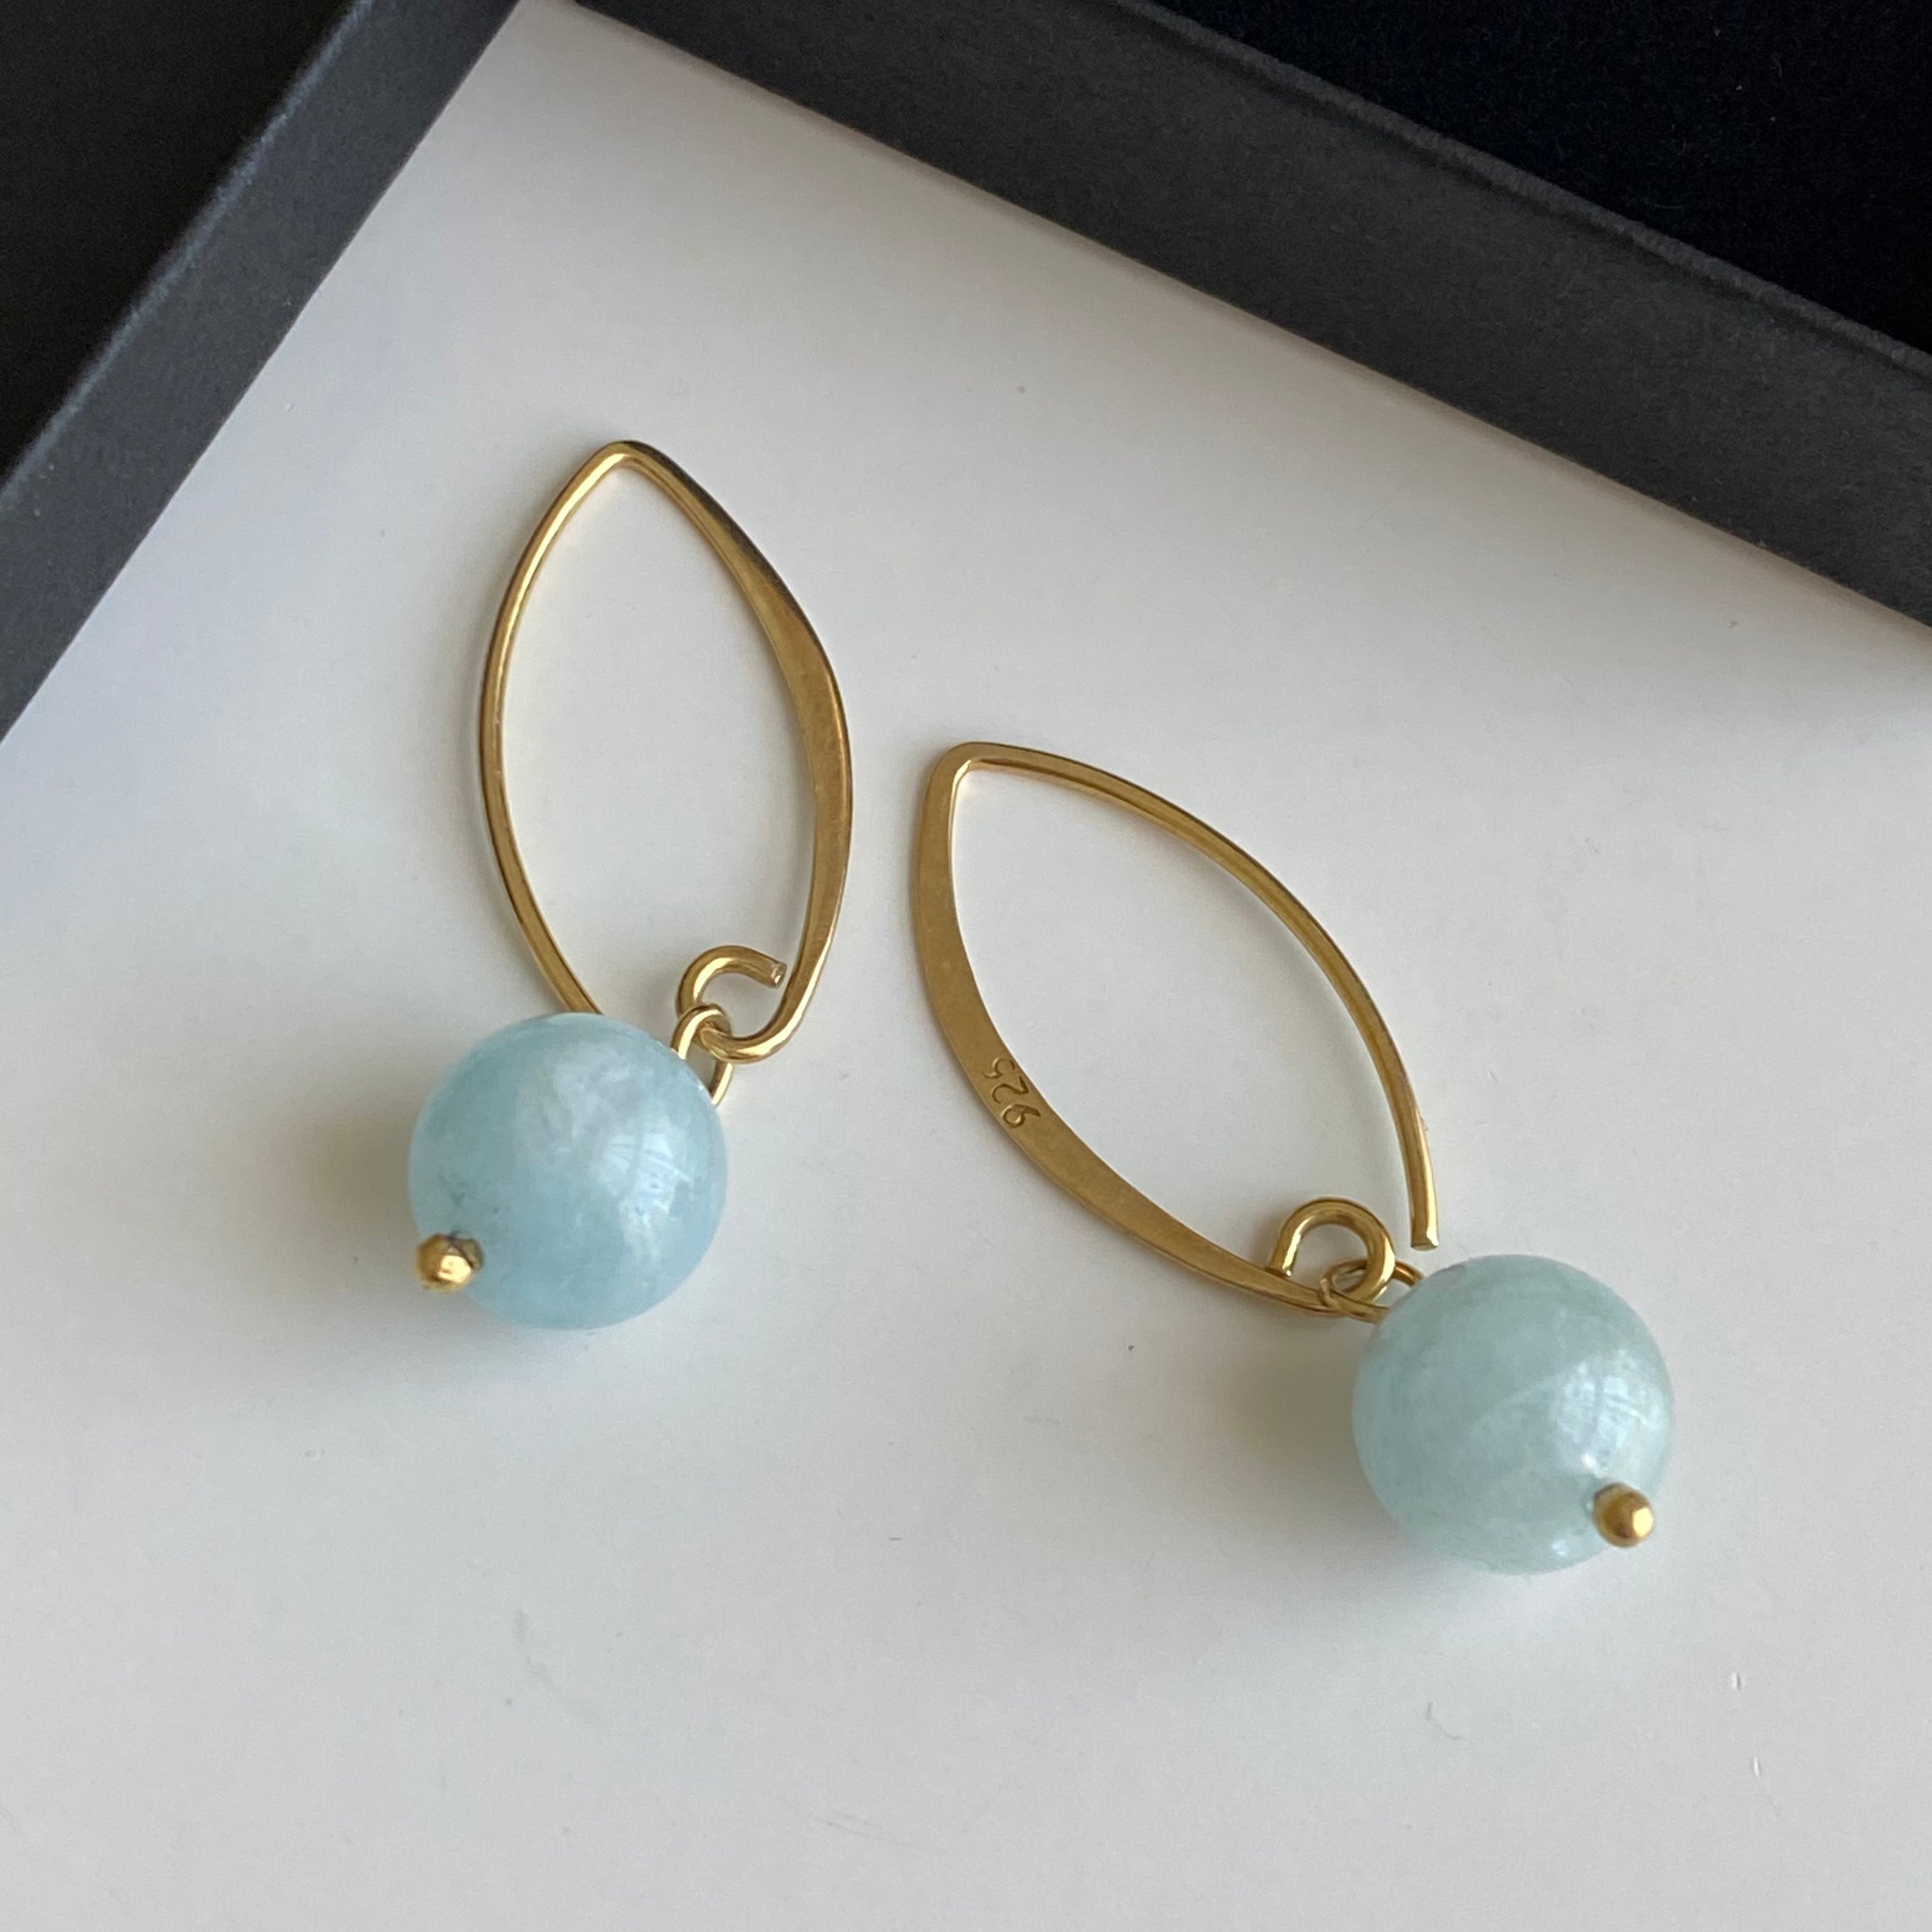 Gold Plated Sterling Silver Threader Earrings with Aquamarine Drop